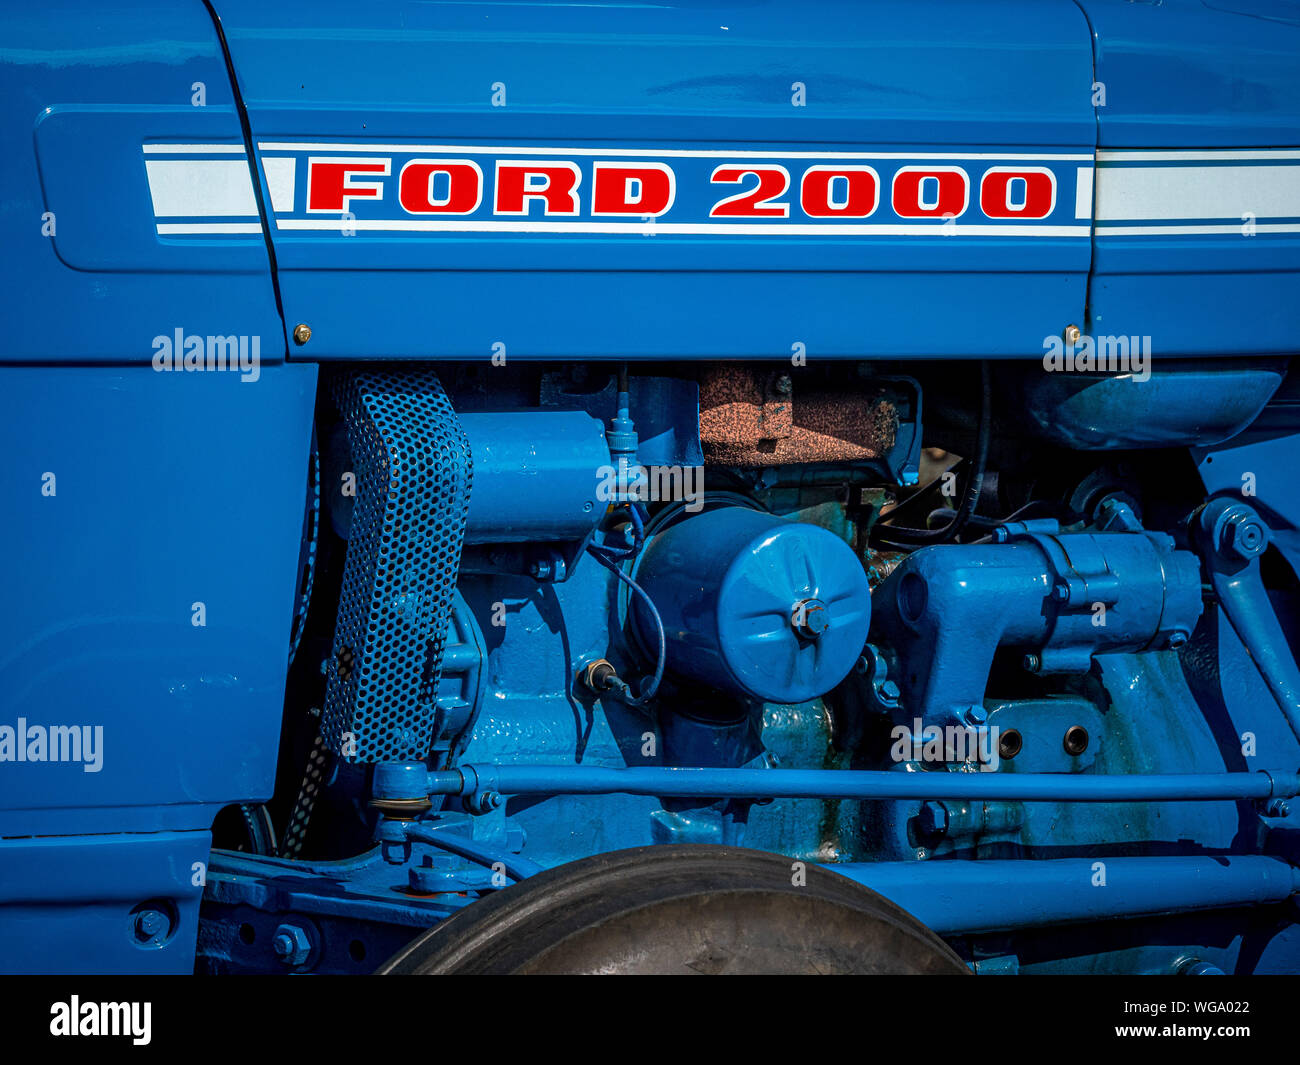 Engine of Ford 2000 vintage tractor painted blue with red and white lettering Stock Photo